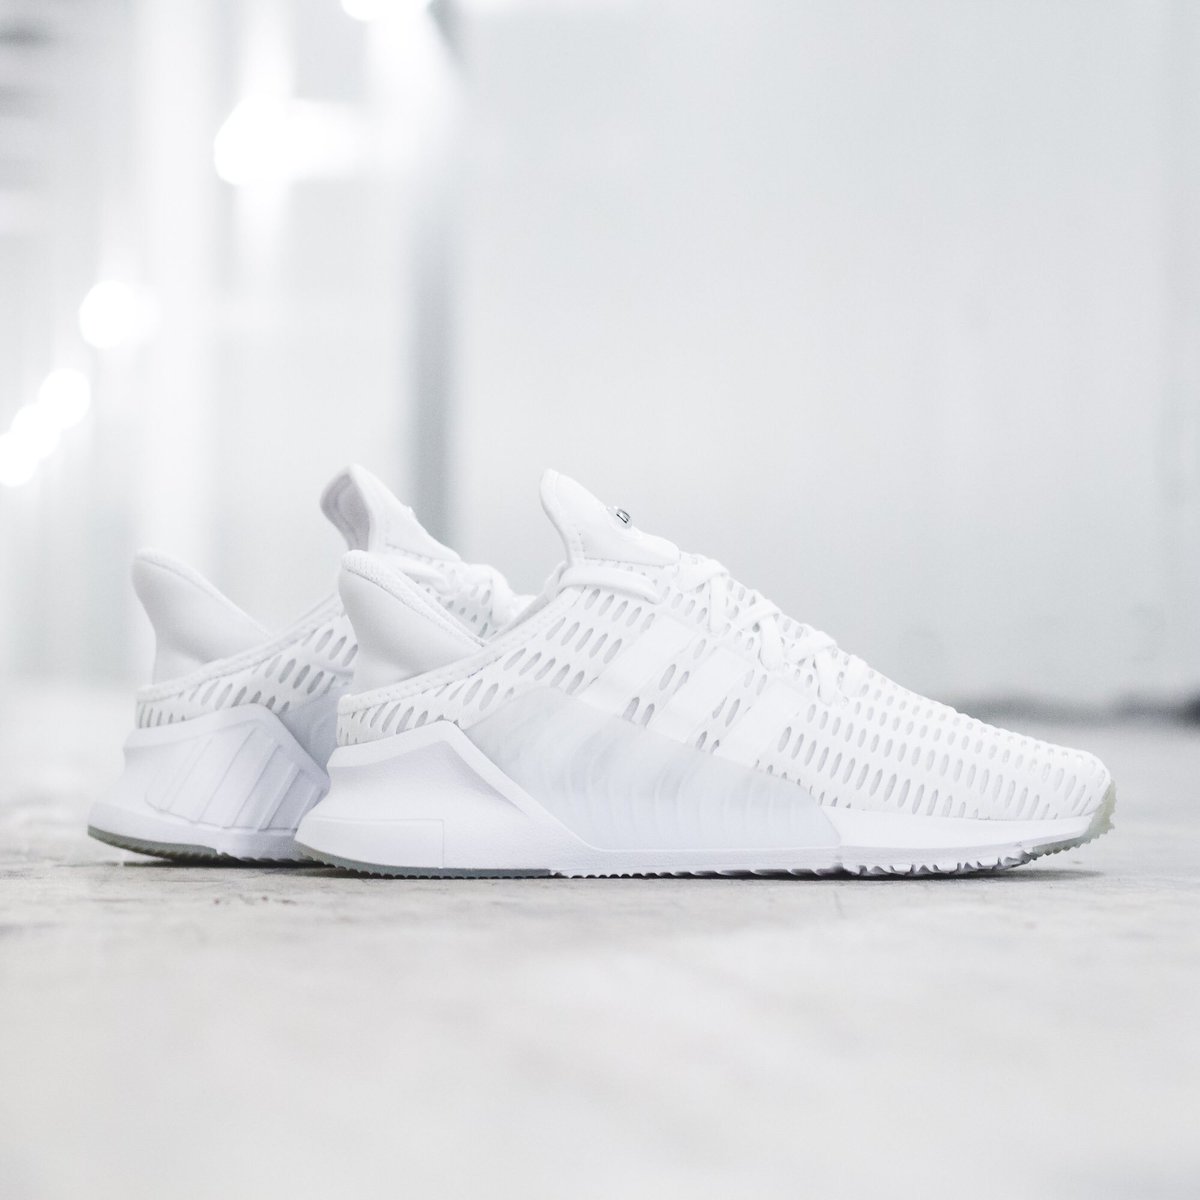 adidas climacool 46 online